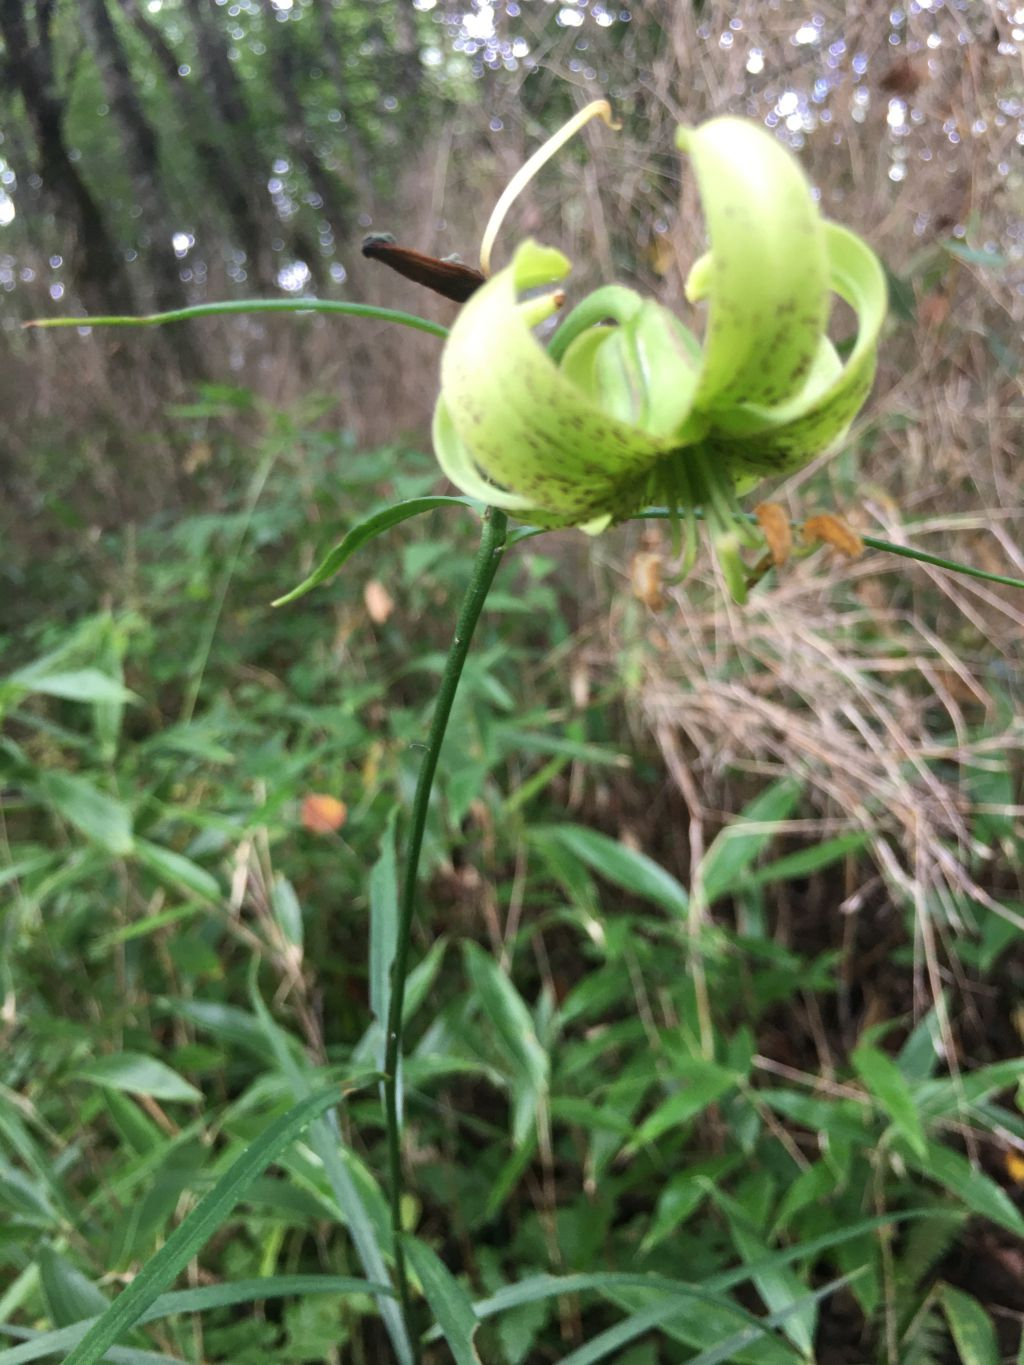 Lilium fargesii (Picture provided by Chongqing Yintiaoling National Nature Reserve Management Center)